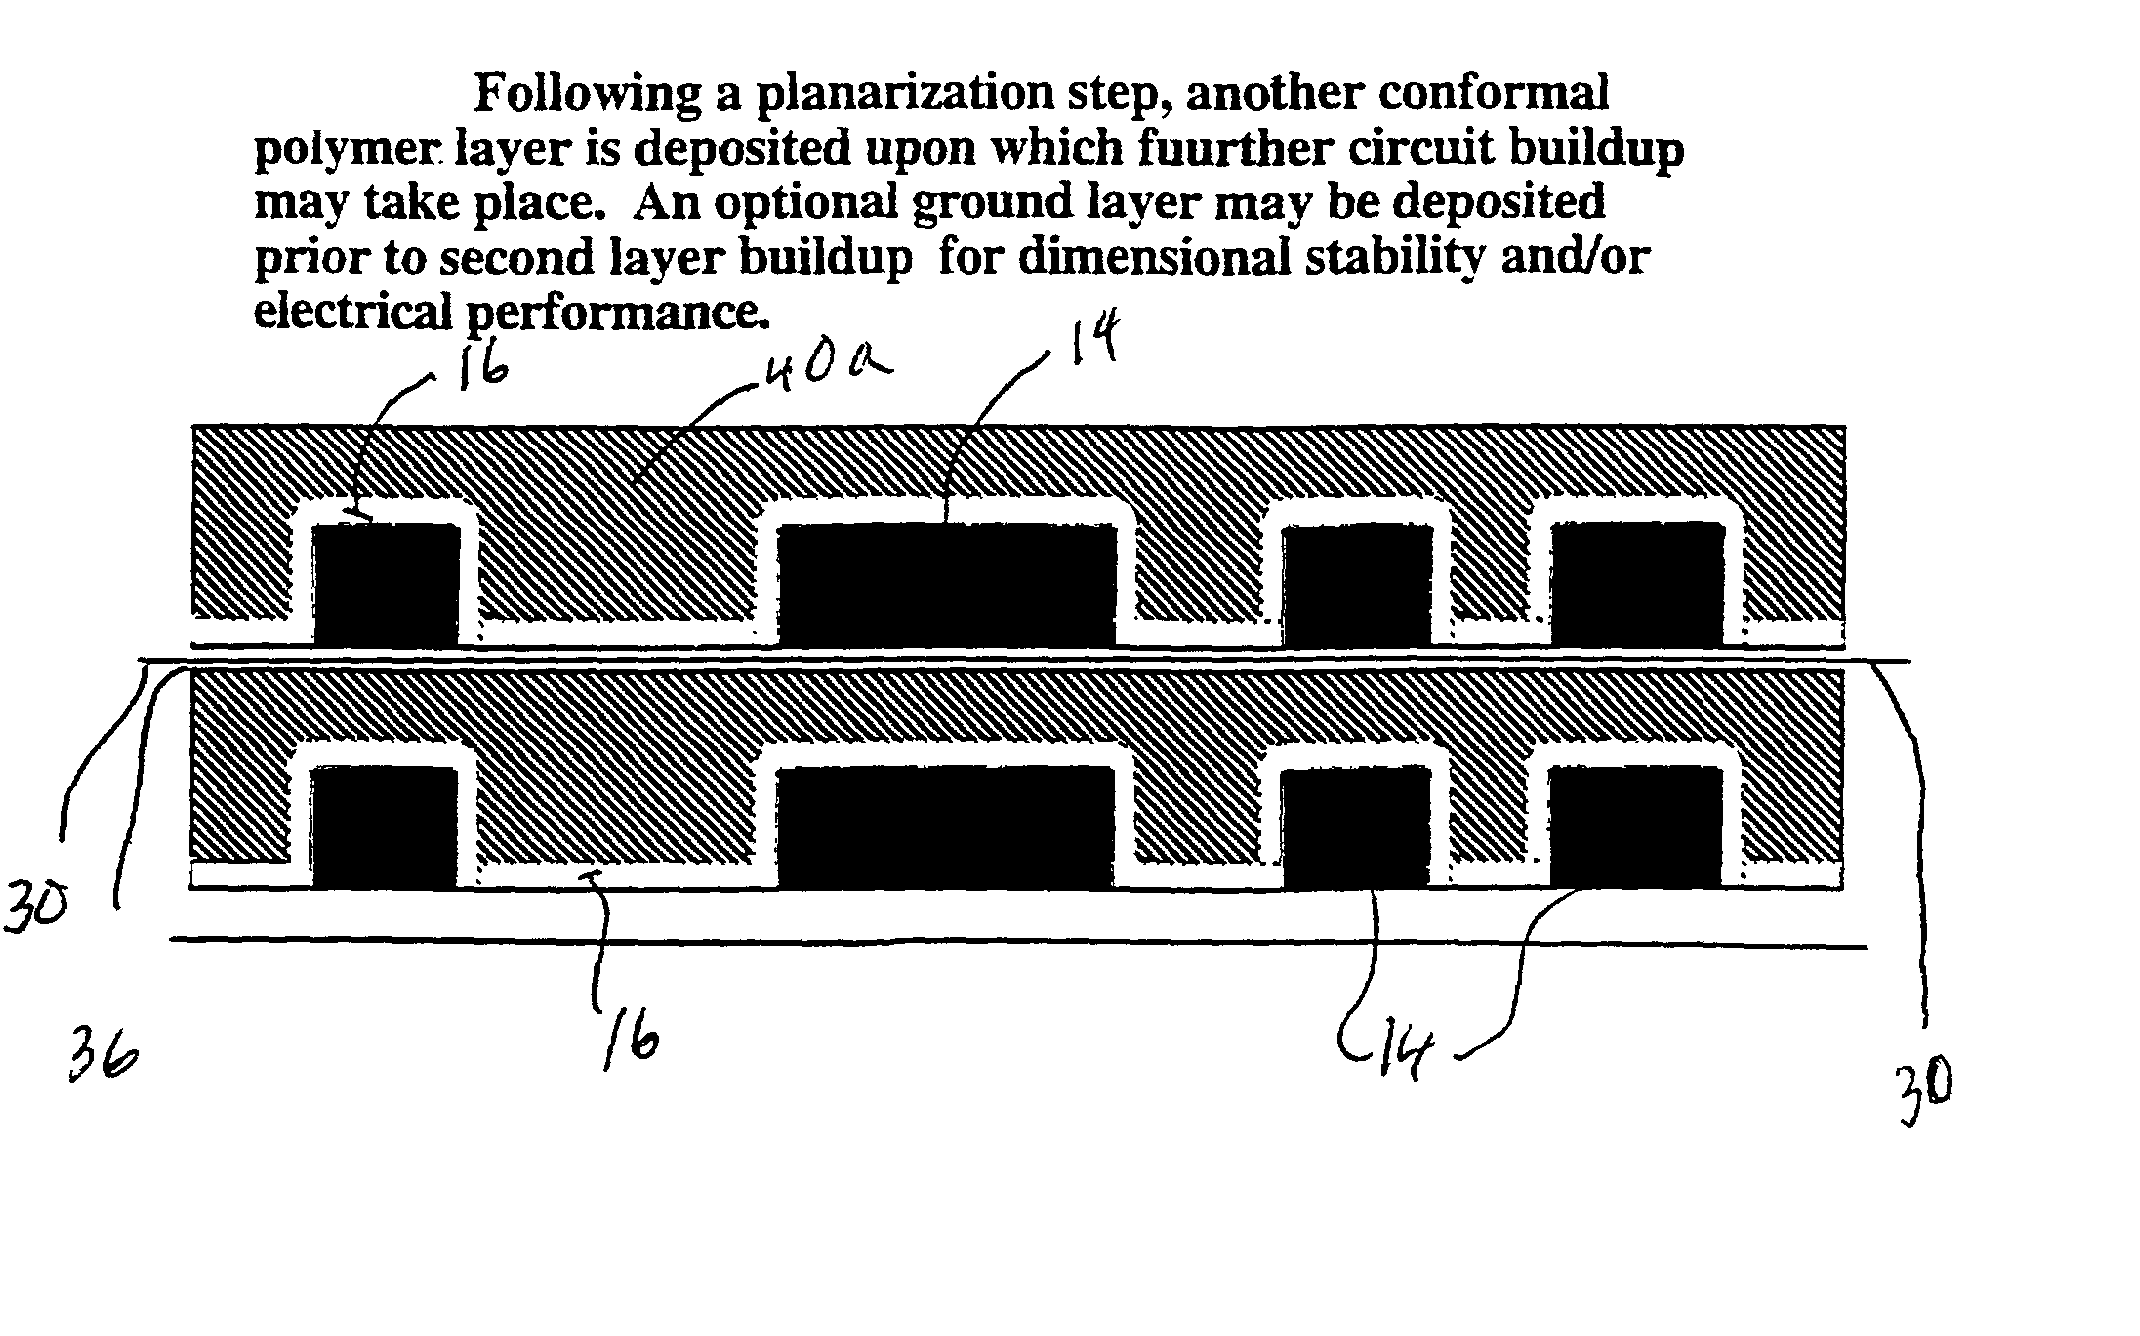 Multi-chip module and method for forming and method for deplating defective capacitors